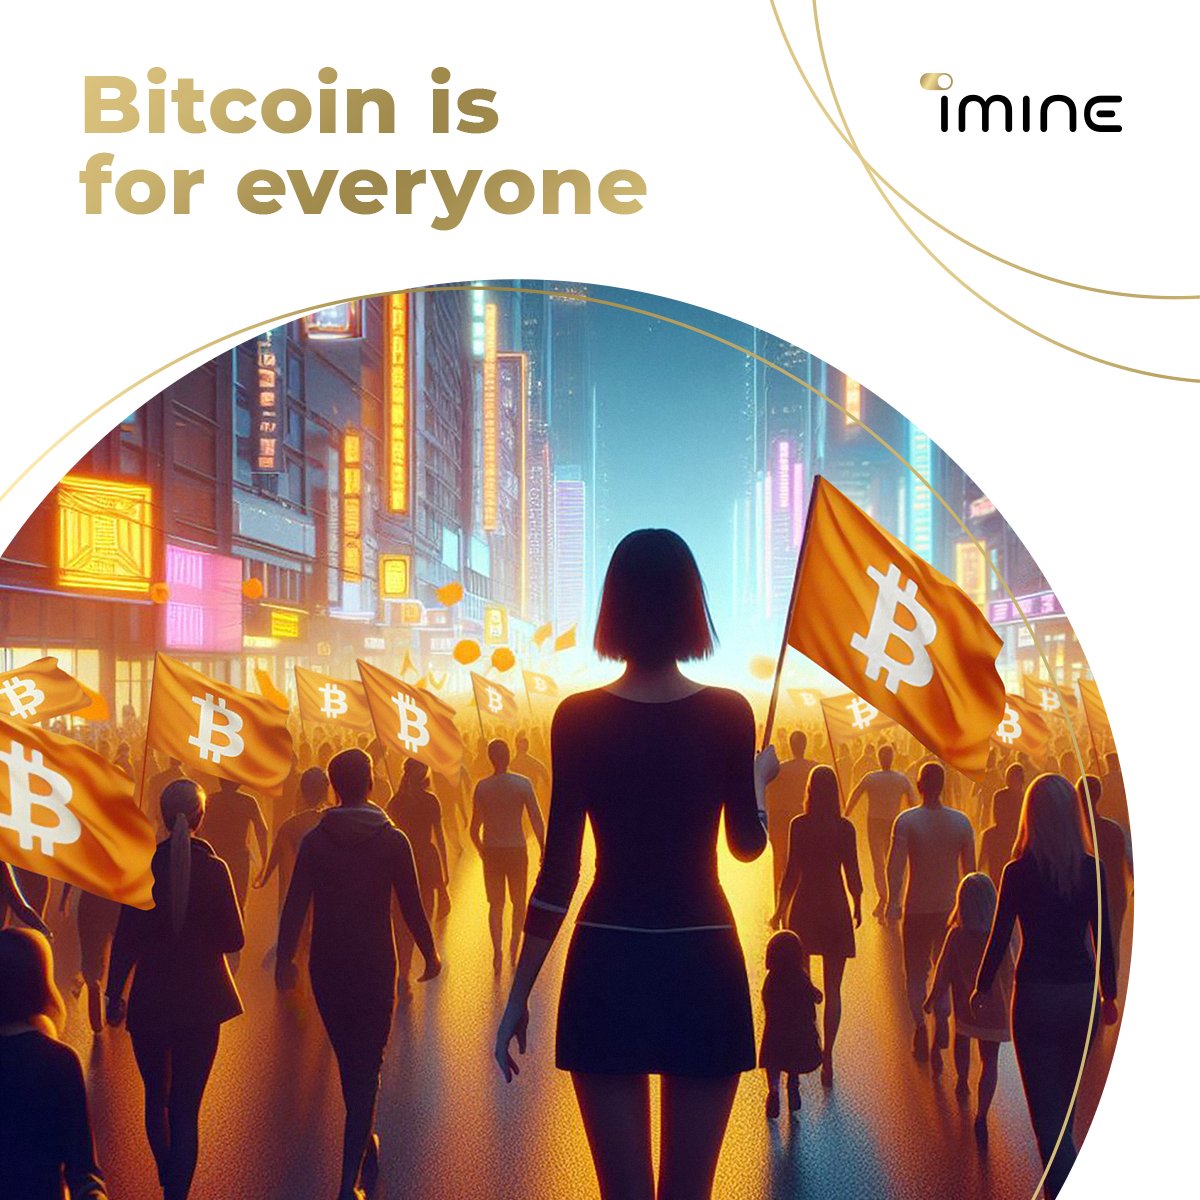 Bitcoin is for Everyone! 💰🌍

Bitcoin is open to you no matter who you are – tech lover, newbie, or just curious. It's a money revolution that anyone can be part of. No limits, just freedom to control your money. Ready to join in? #Bitcoin #BitcoinForAll #jointhewave🌊🌊🌊